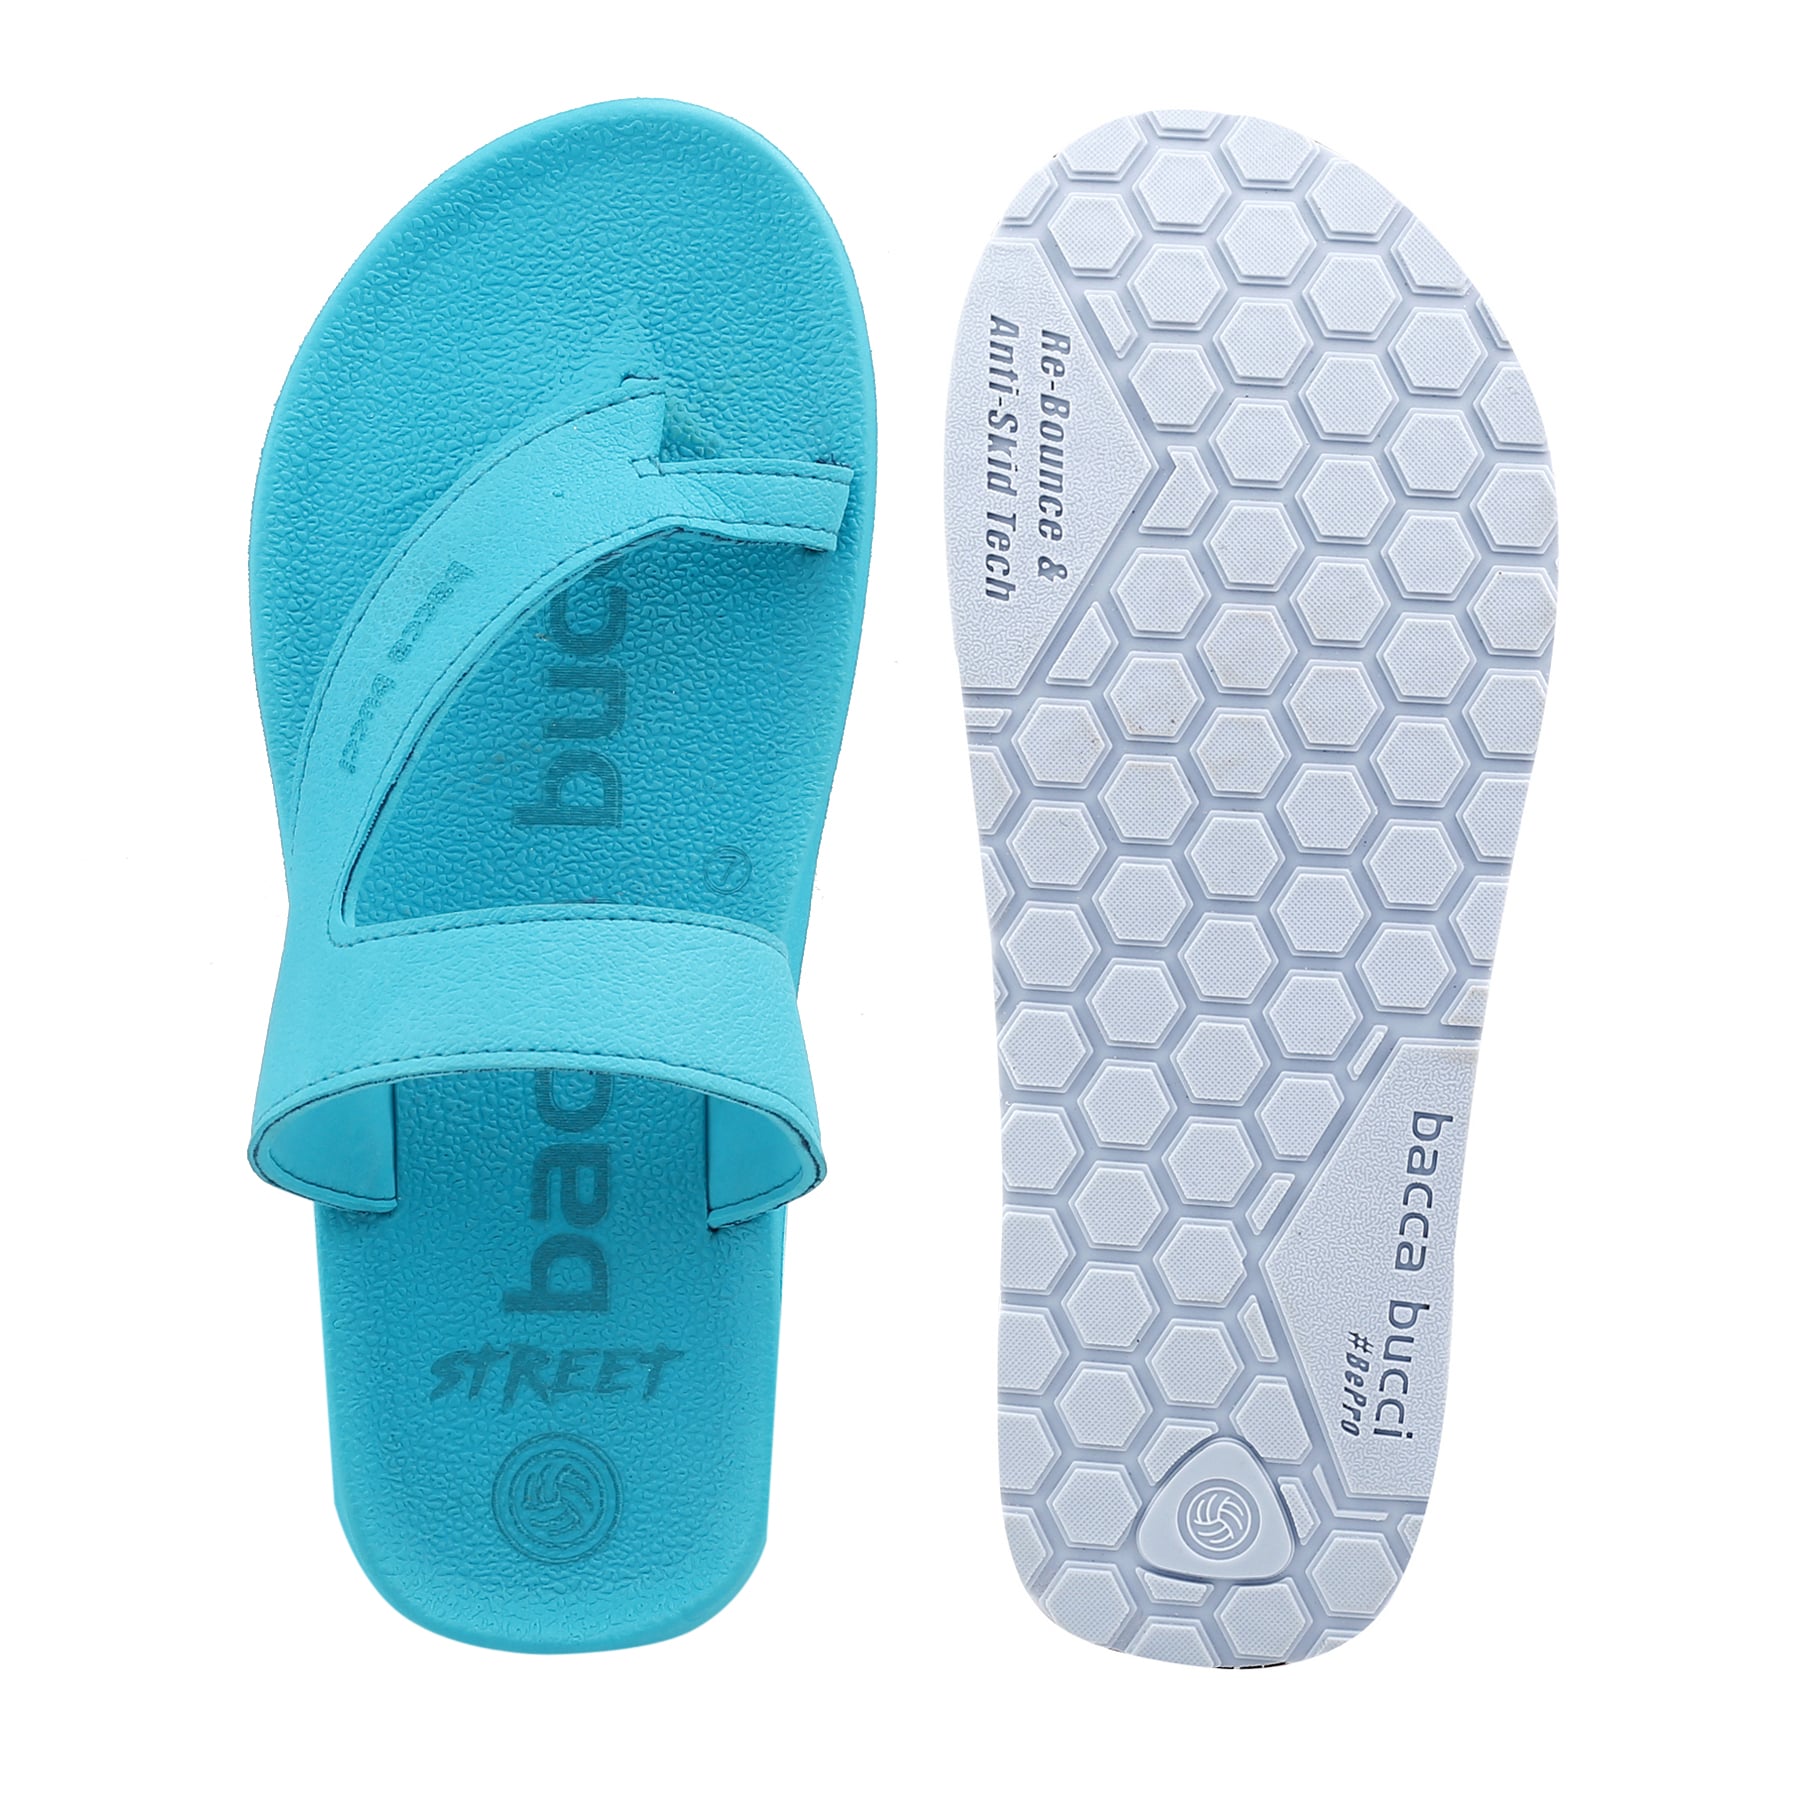 Bacca Bucci BEACH-CLUB Cloud Slippers/Flip-Flop for Men | Non-Slip With Rubber Outsole and Vibrant Colors